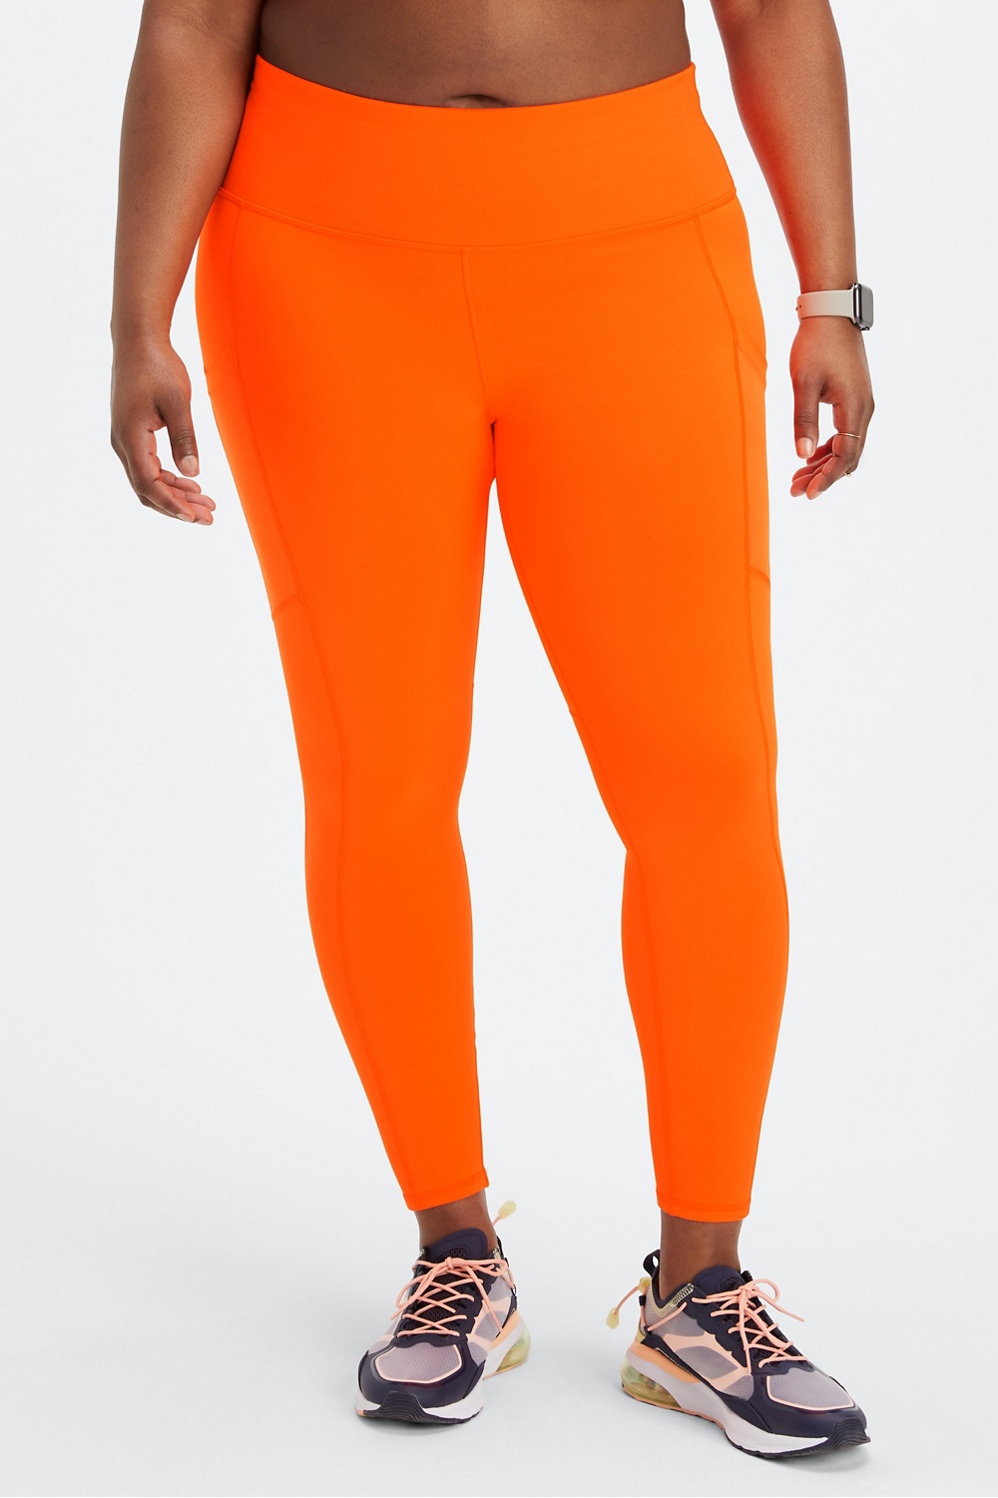 Freddy leggings for gym and spare time: online store Orange